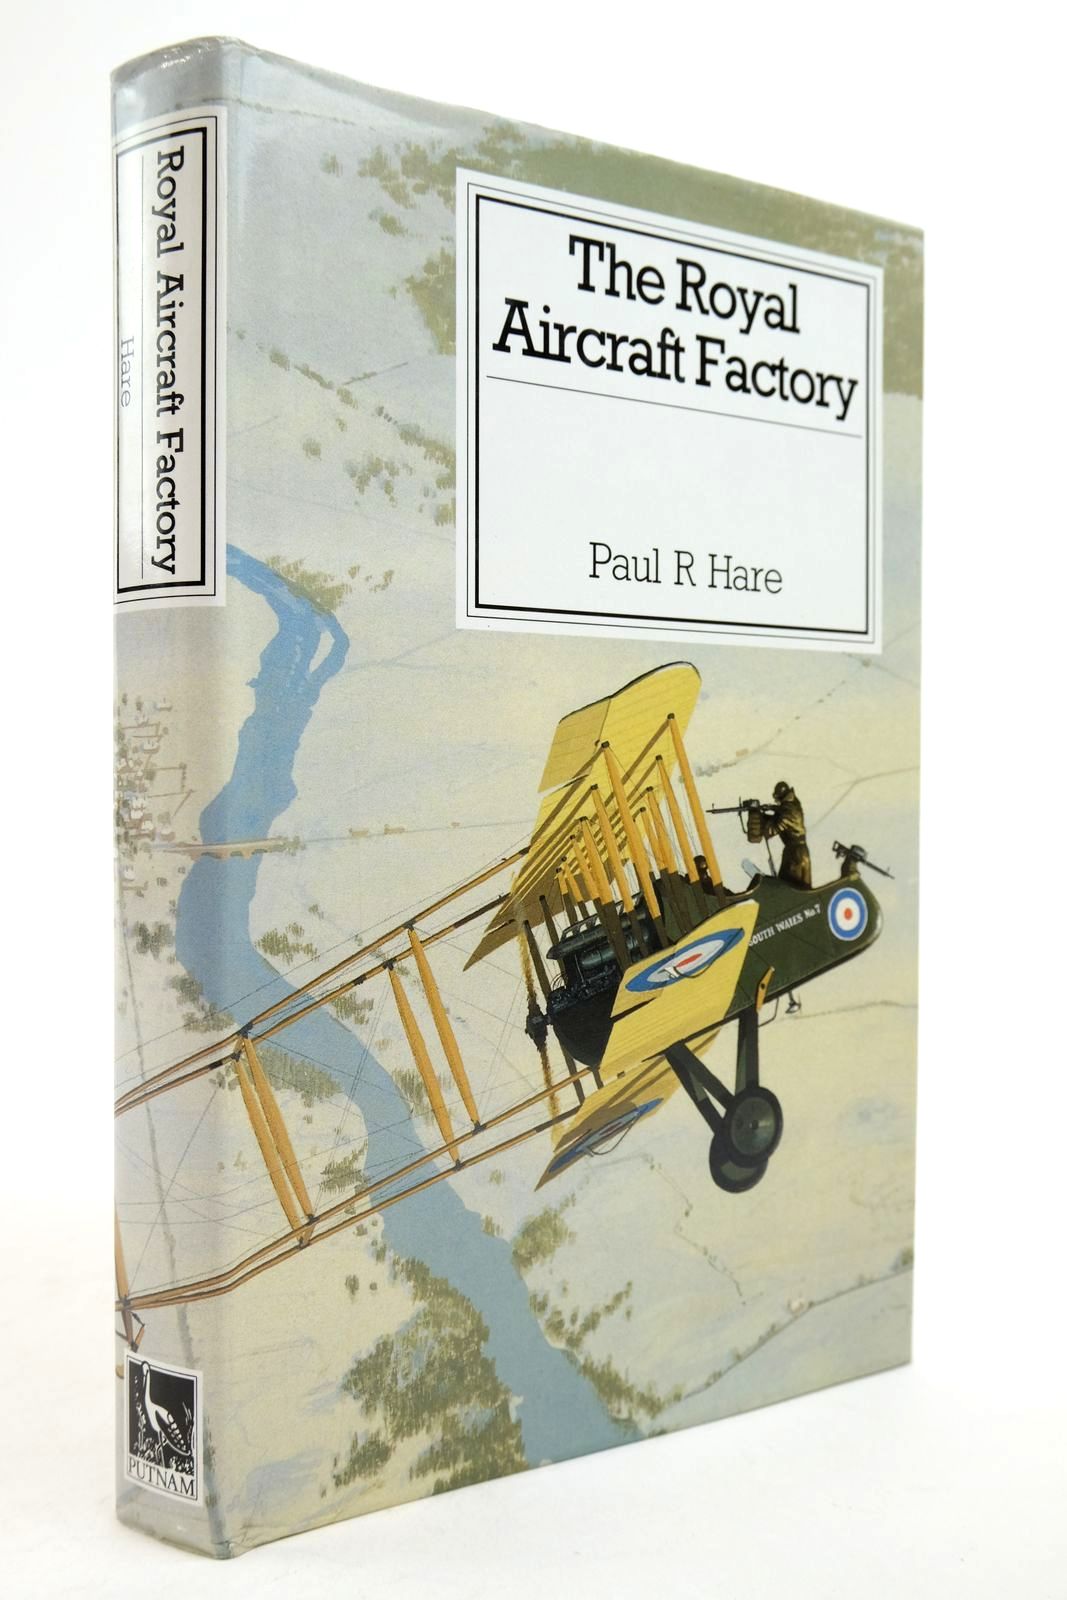 Photo of THE ROYAL AIRCRAFT FACTORY written by Hare, Paul R. published by Putnam (STOCK CODE: 2139165)  for sale by Stella & Rose's Books